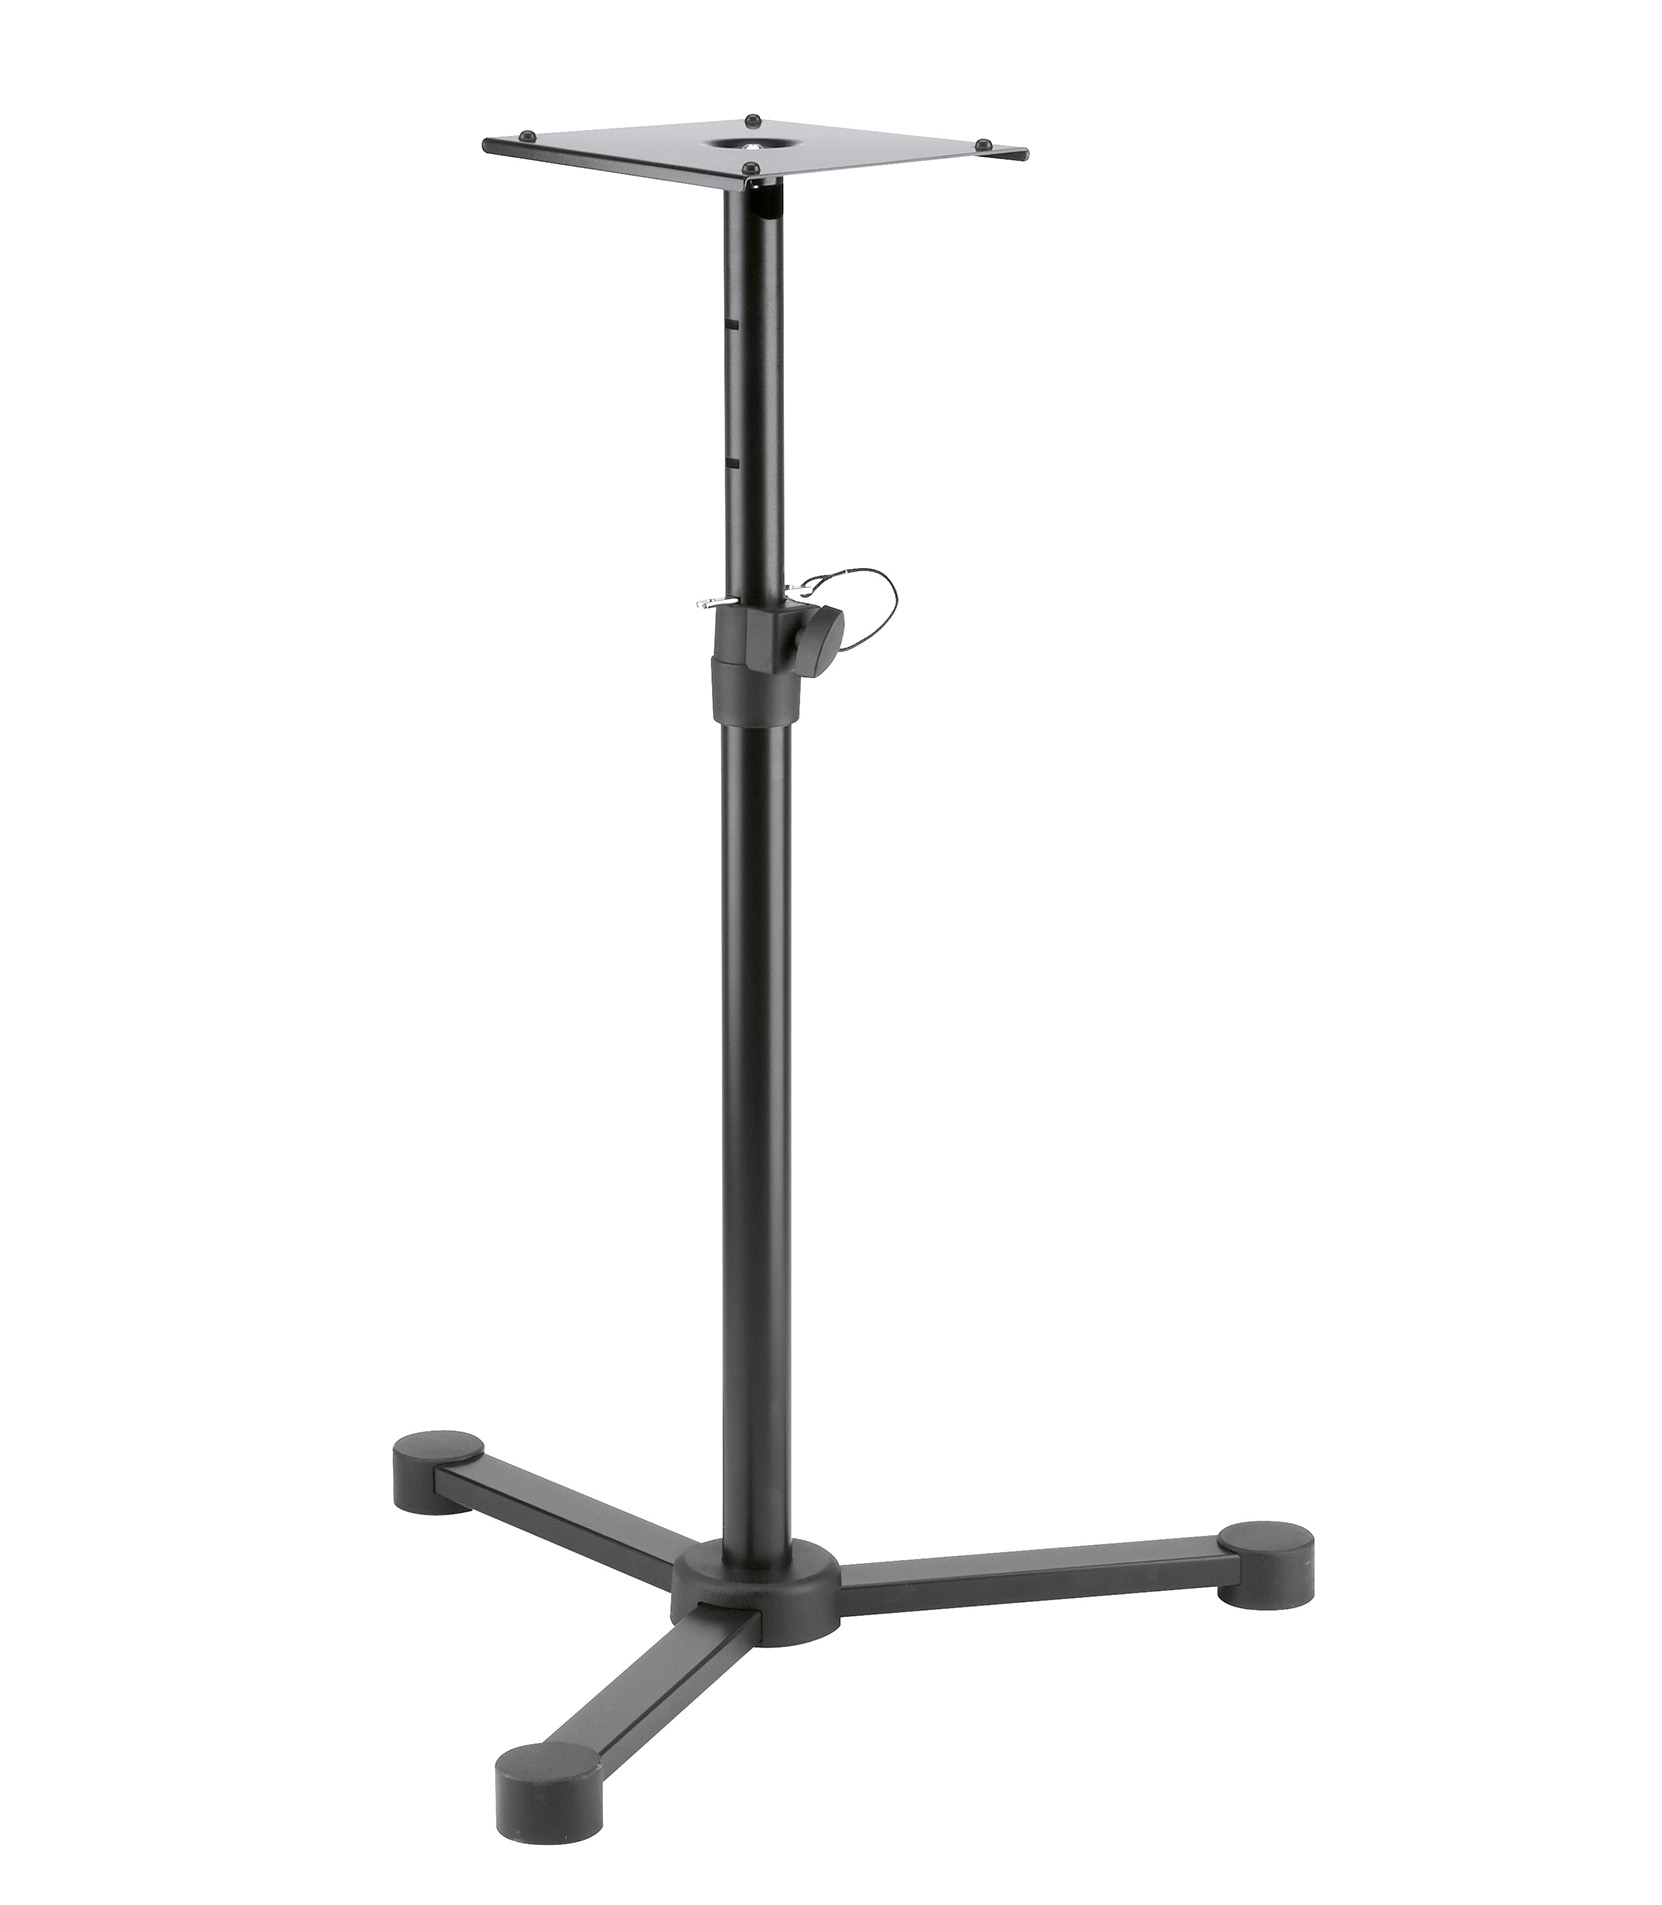 K&M - 26720 000 55 Steel stand for monitors